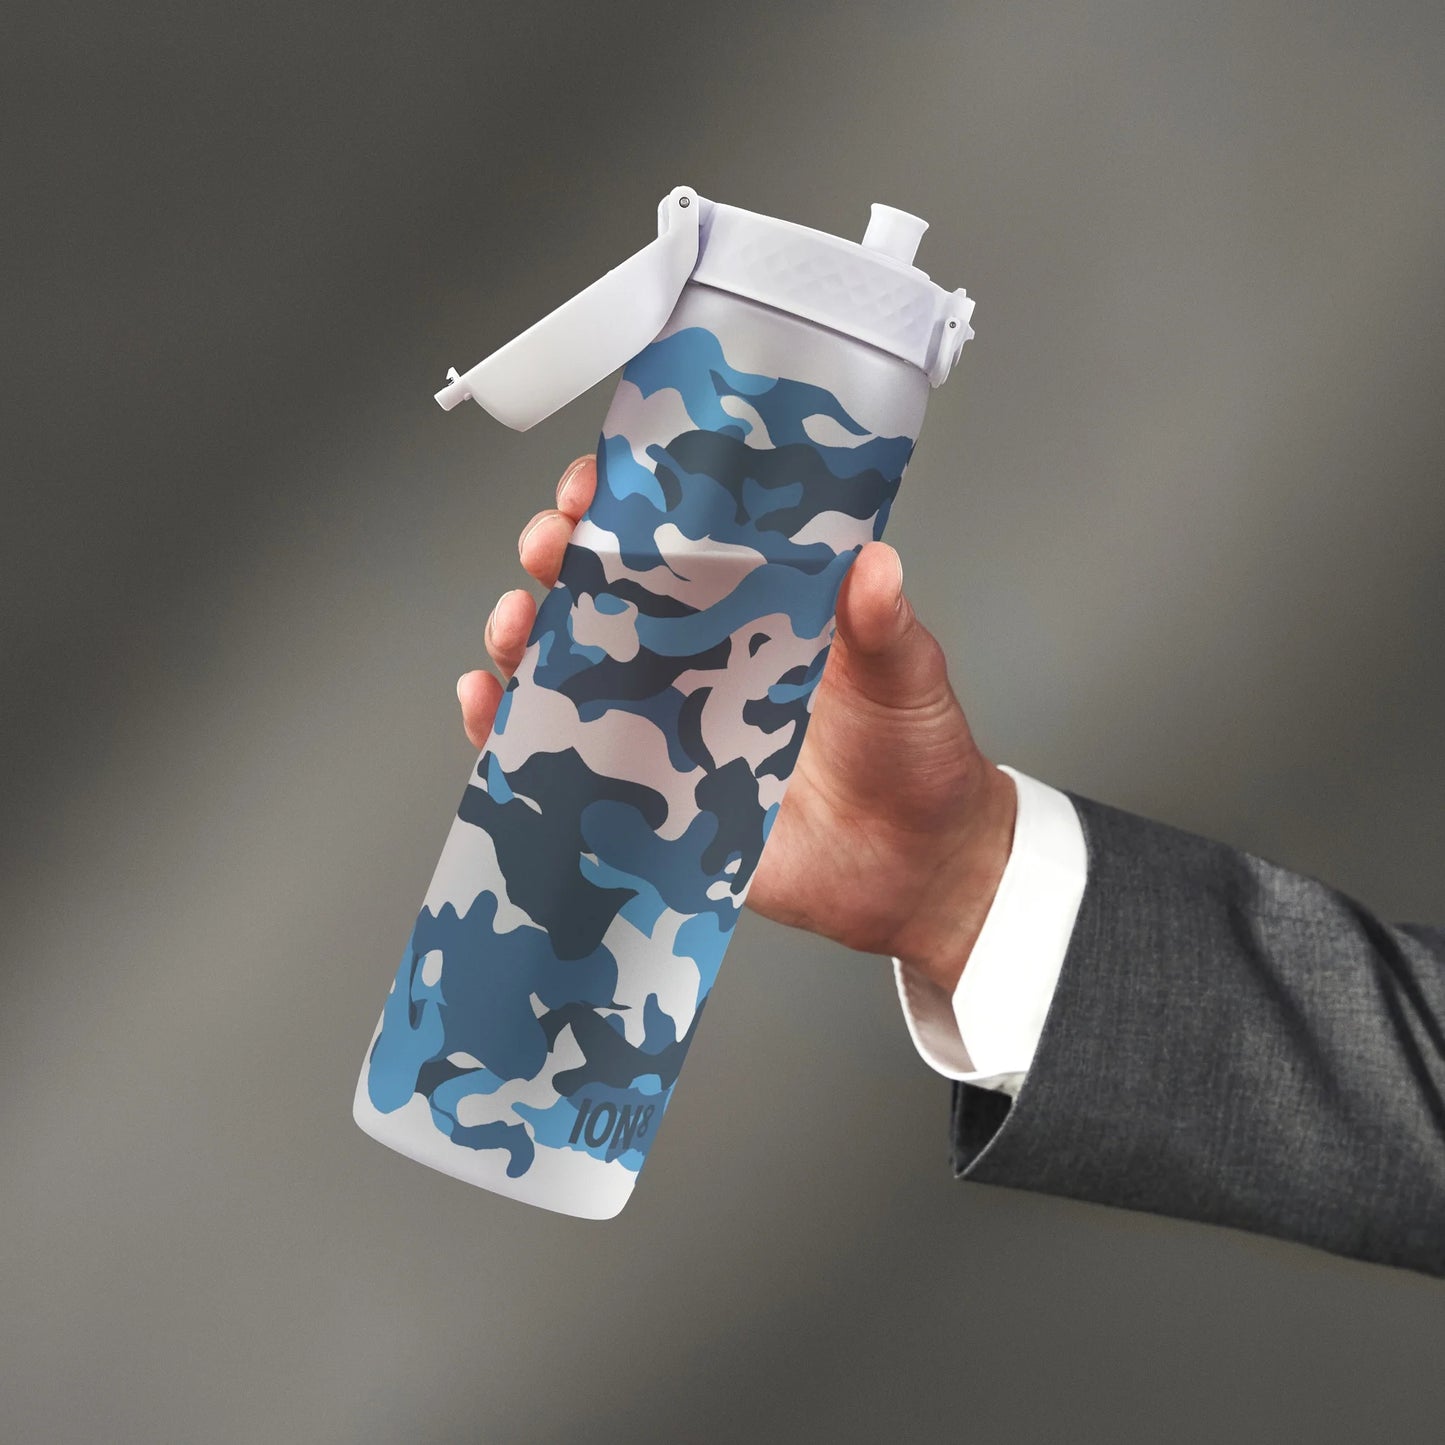 1 litre Water Bottle with Times to Drink, Recyclon, Motivational Camouflage, 1L